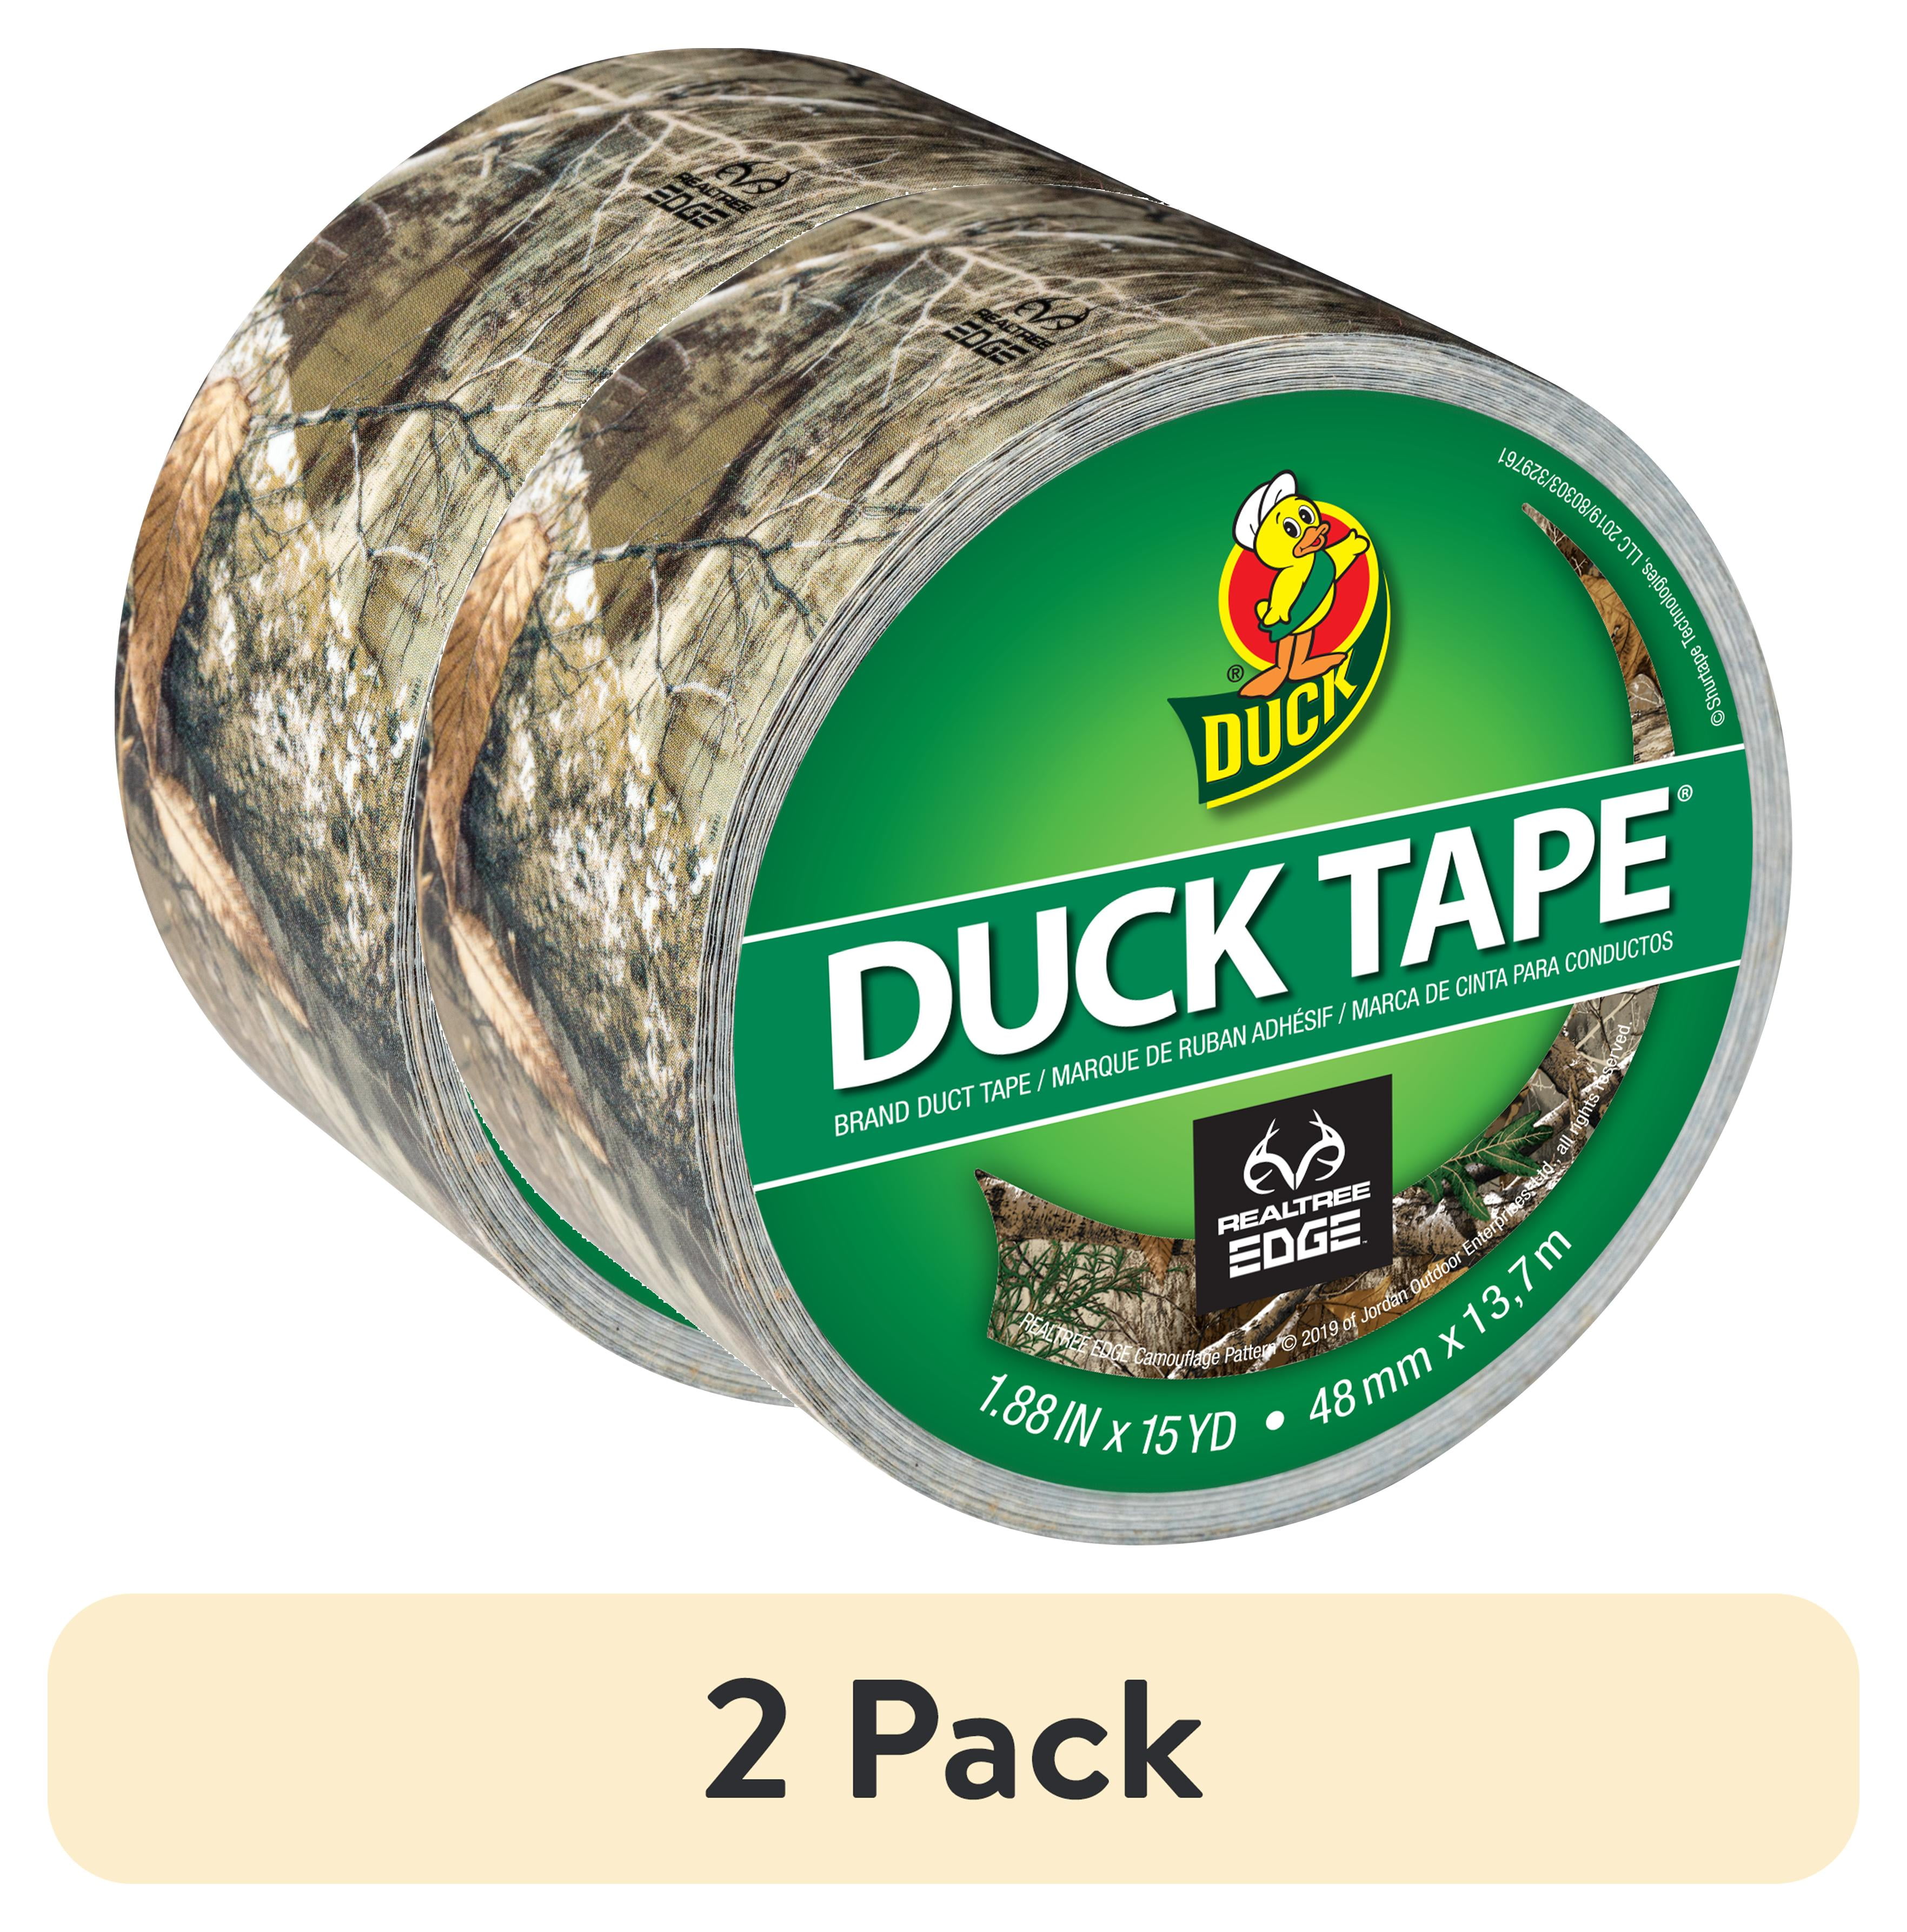 Realtree Edge Camo Duck Tape Brand 1.88 in. x 15 yd. Duct Tape 